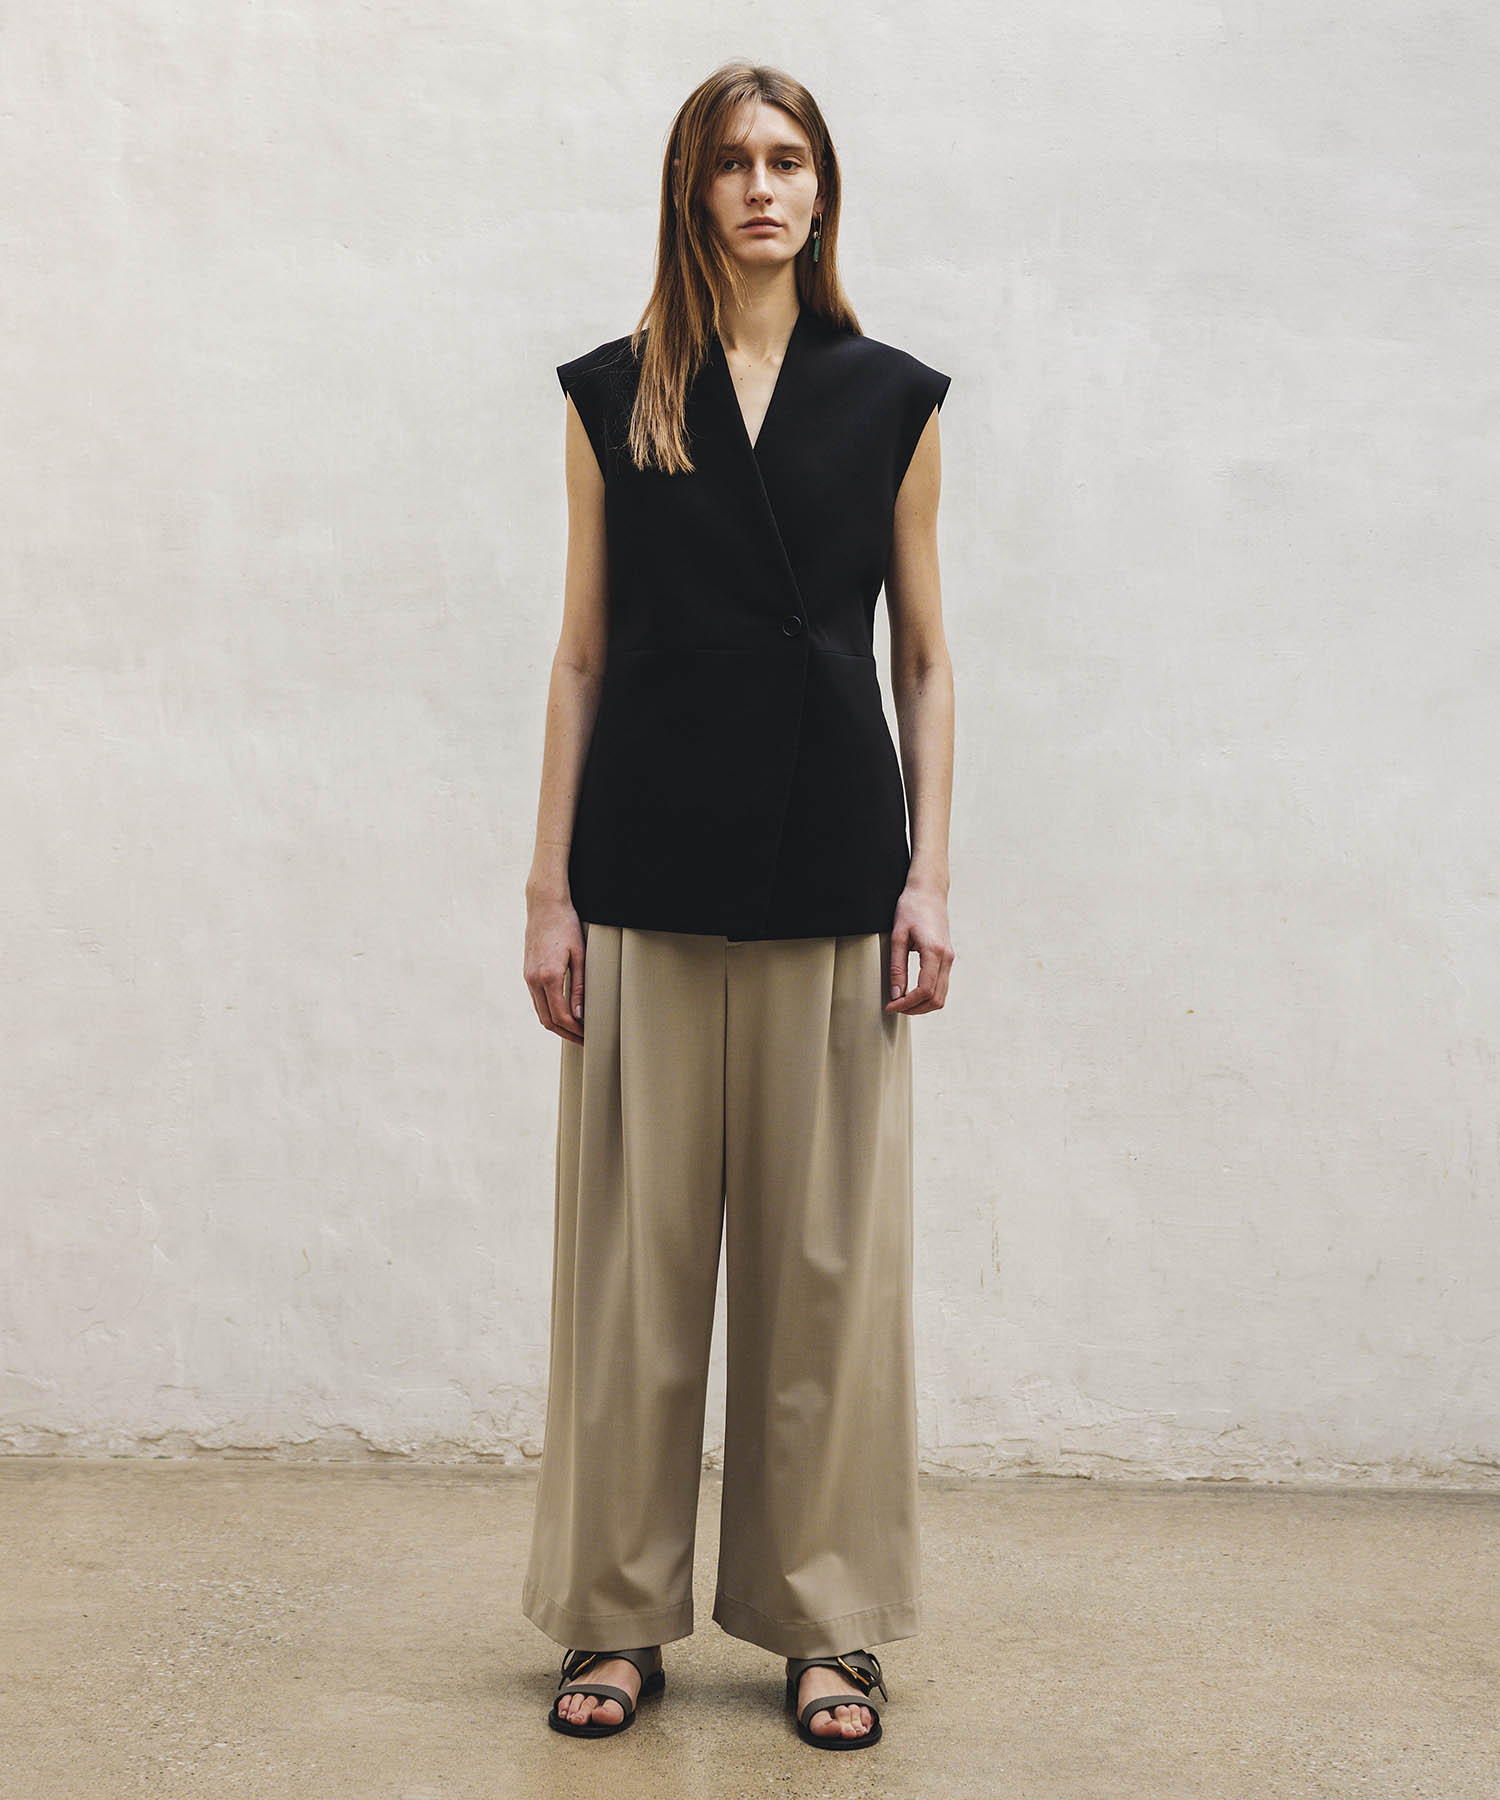 T/R stretch wide relax pants